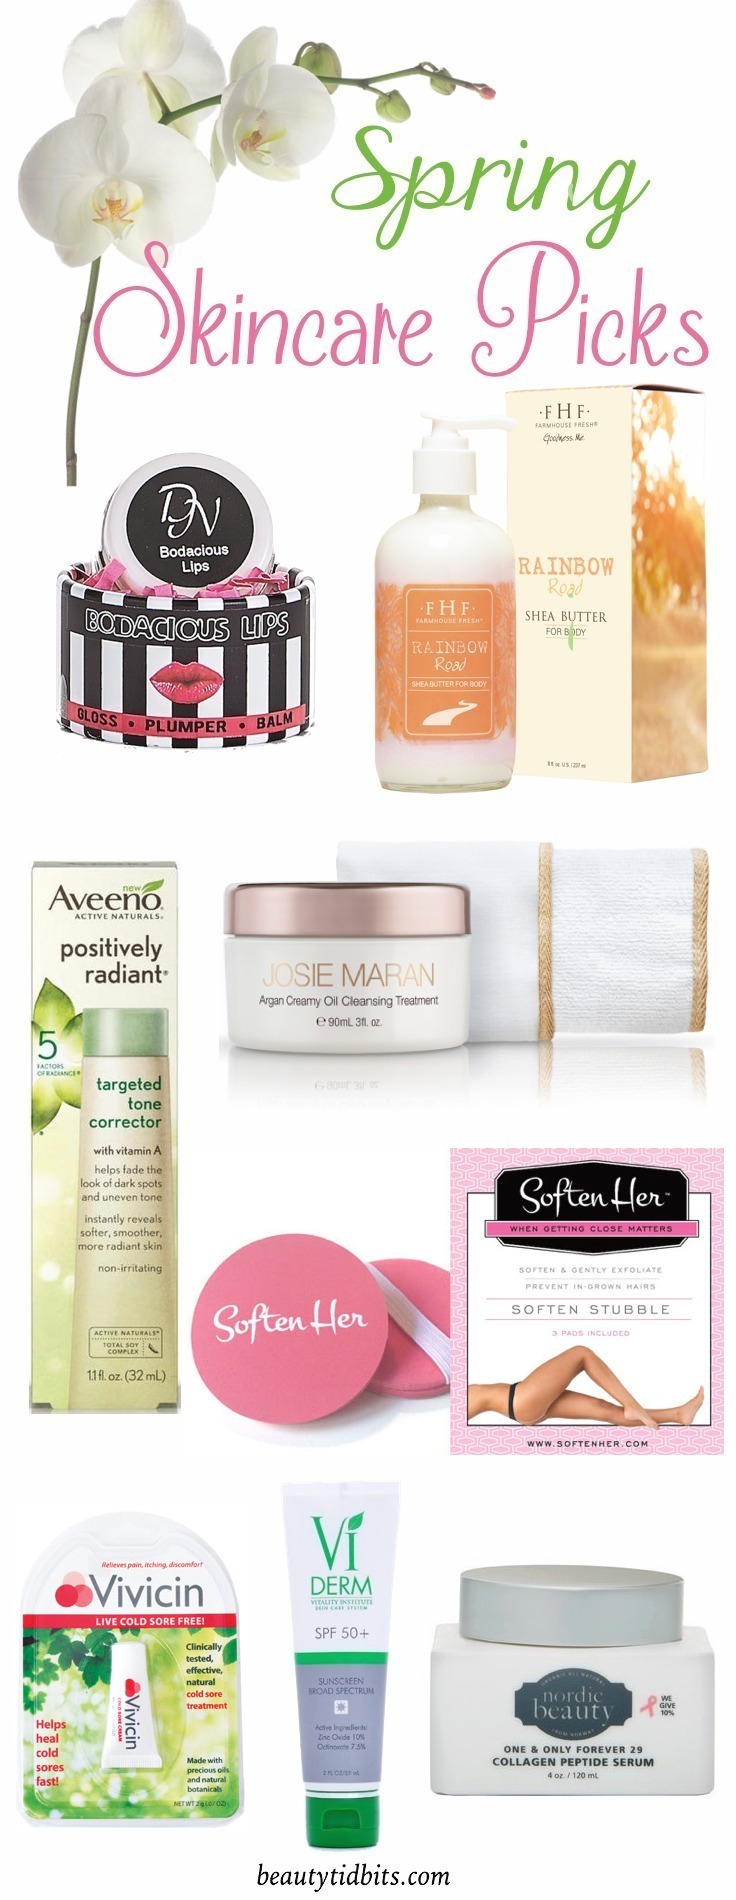 Spring Skincare products